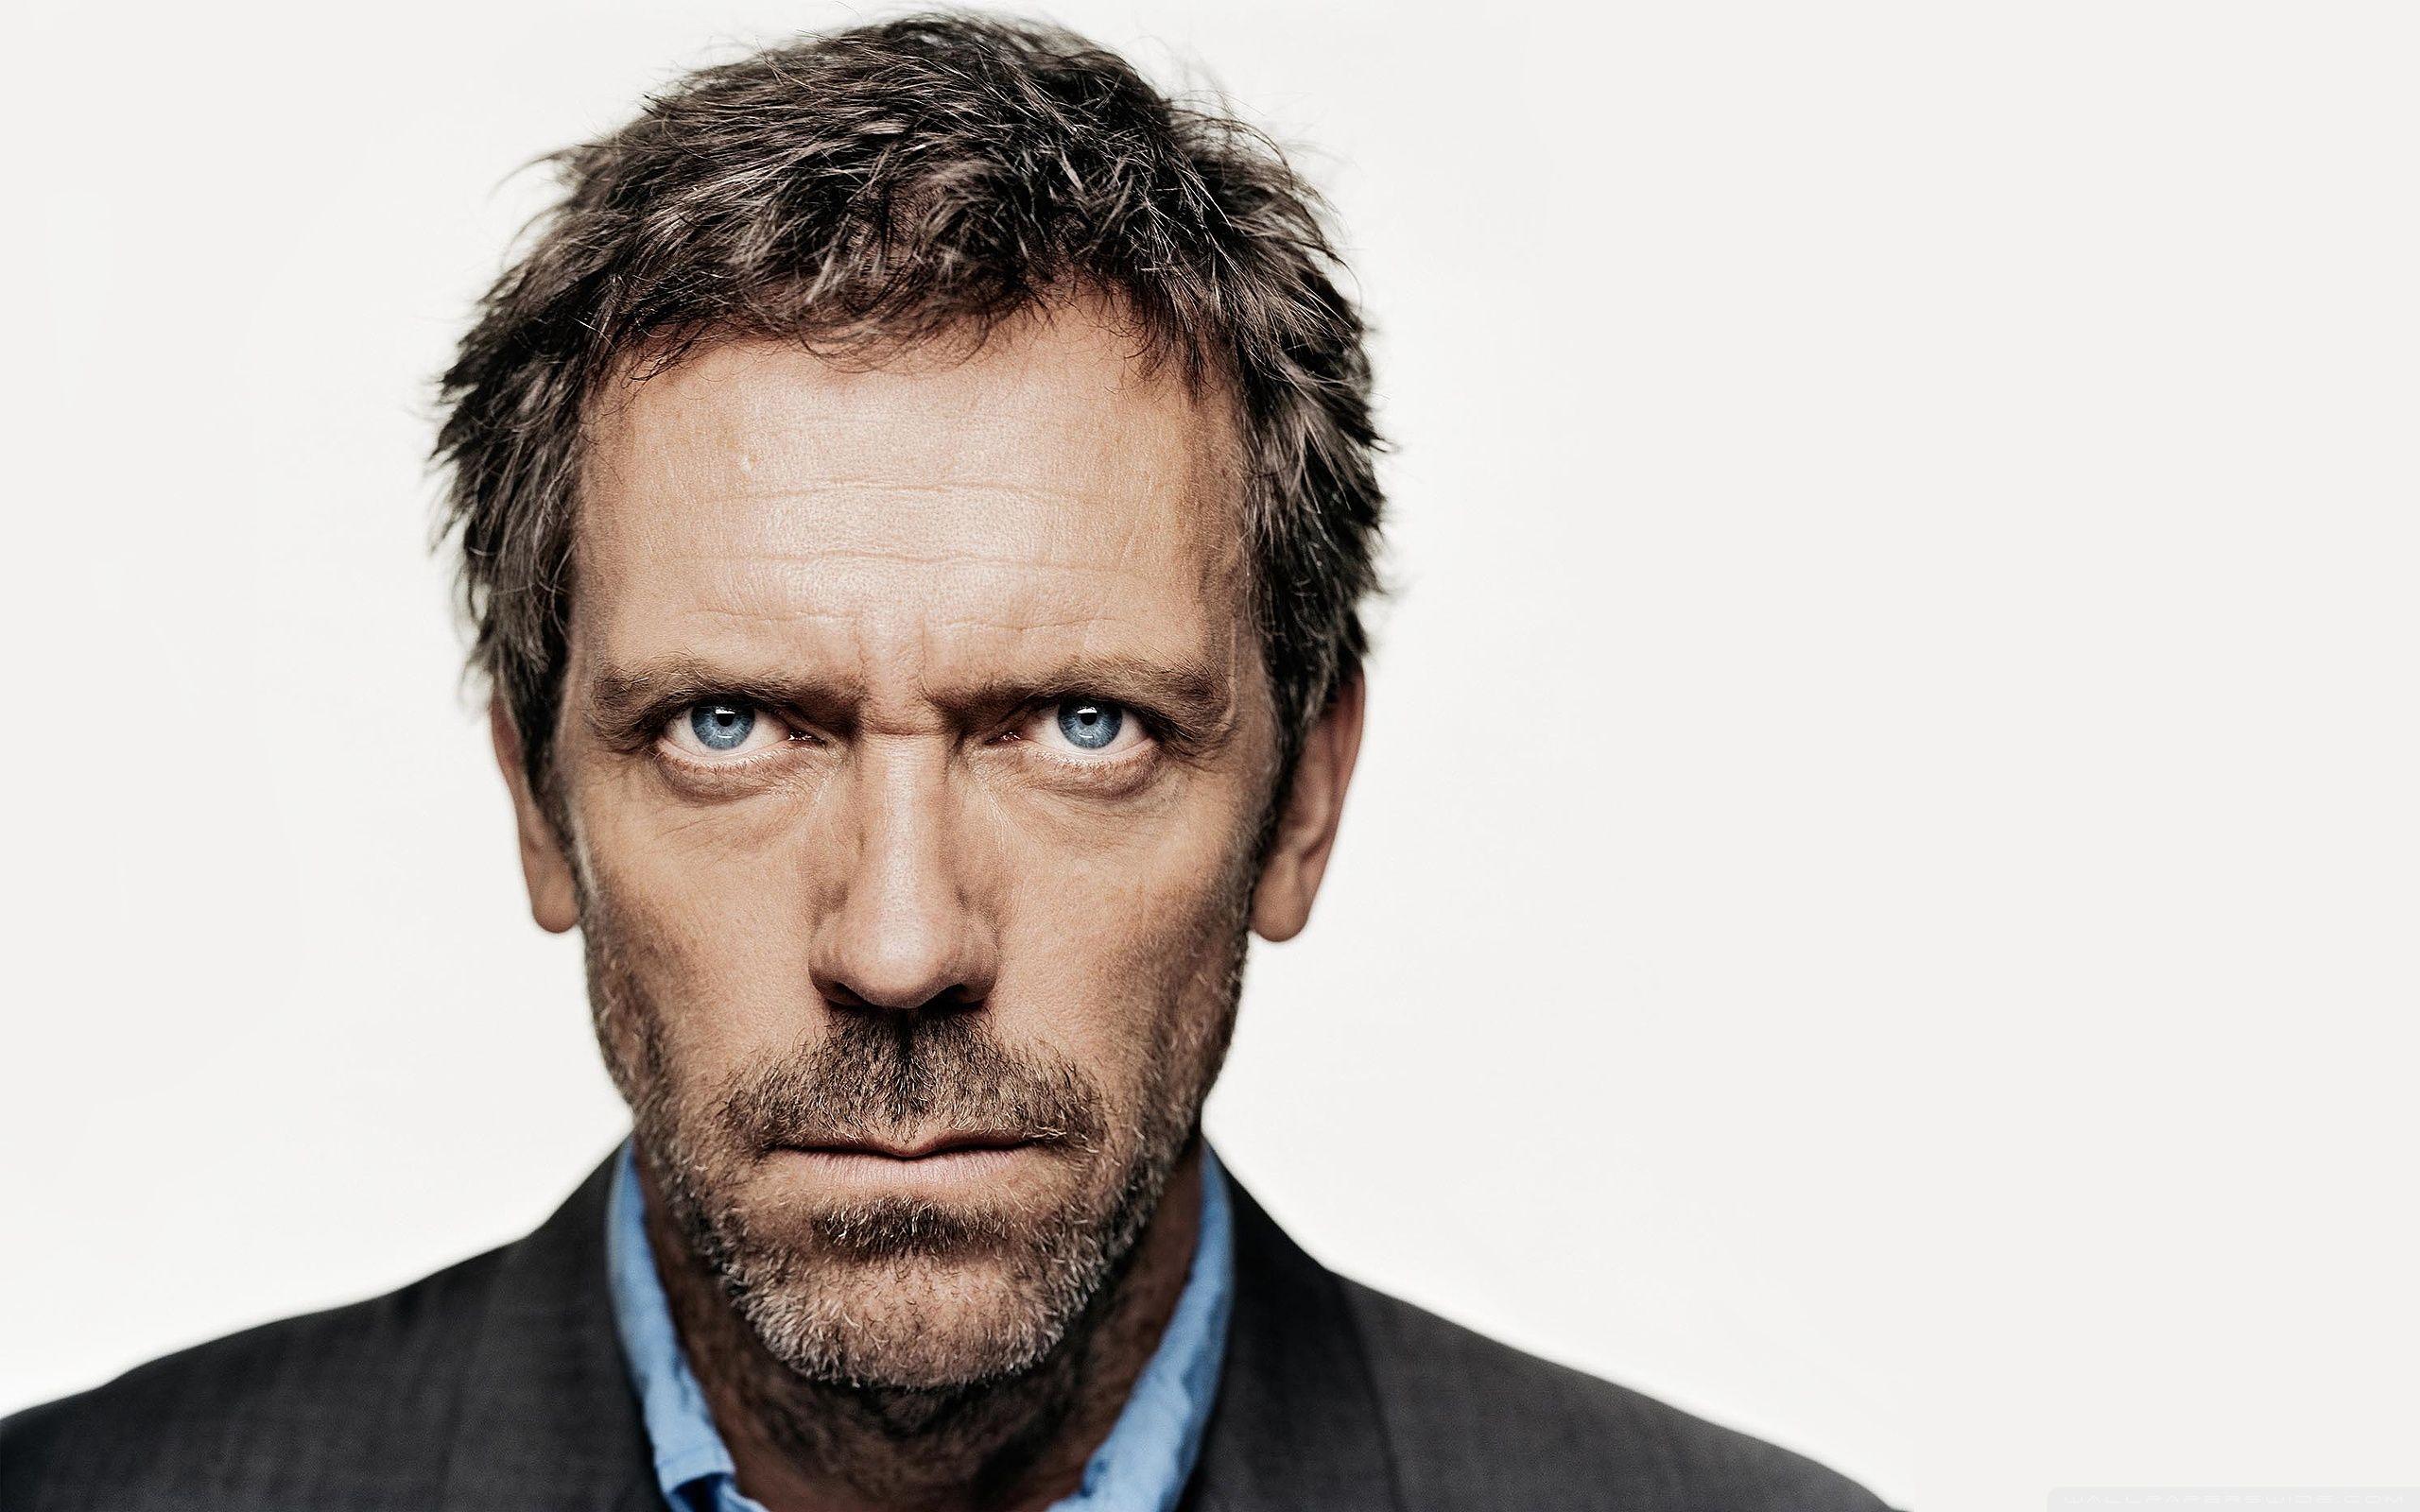 Dr House Wallpapers Top Free Dr House Backgrounds Wallpaperaccess